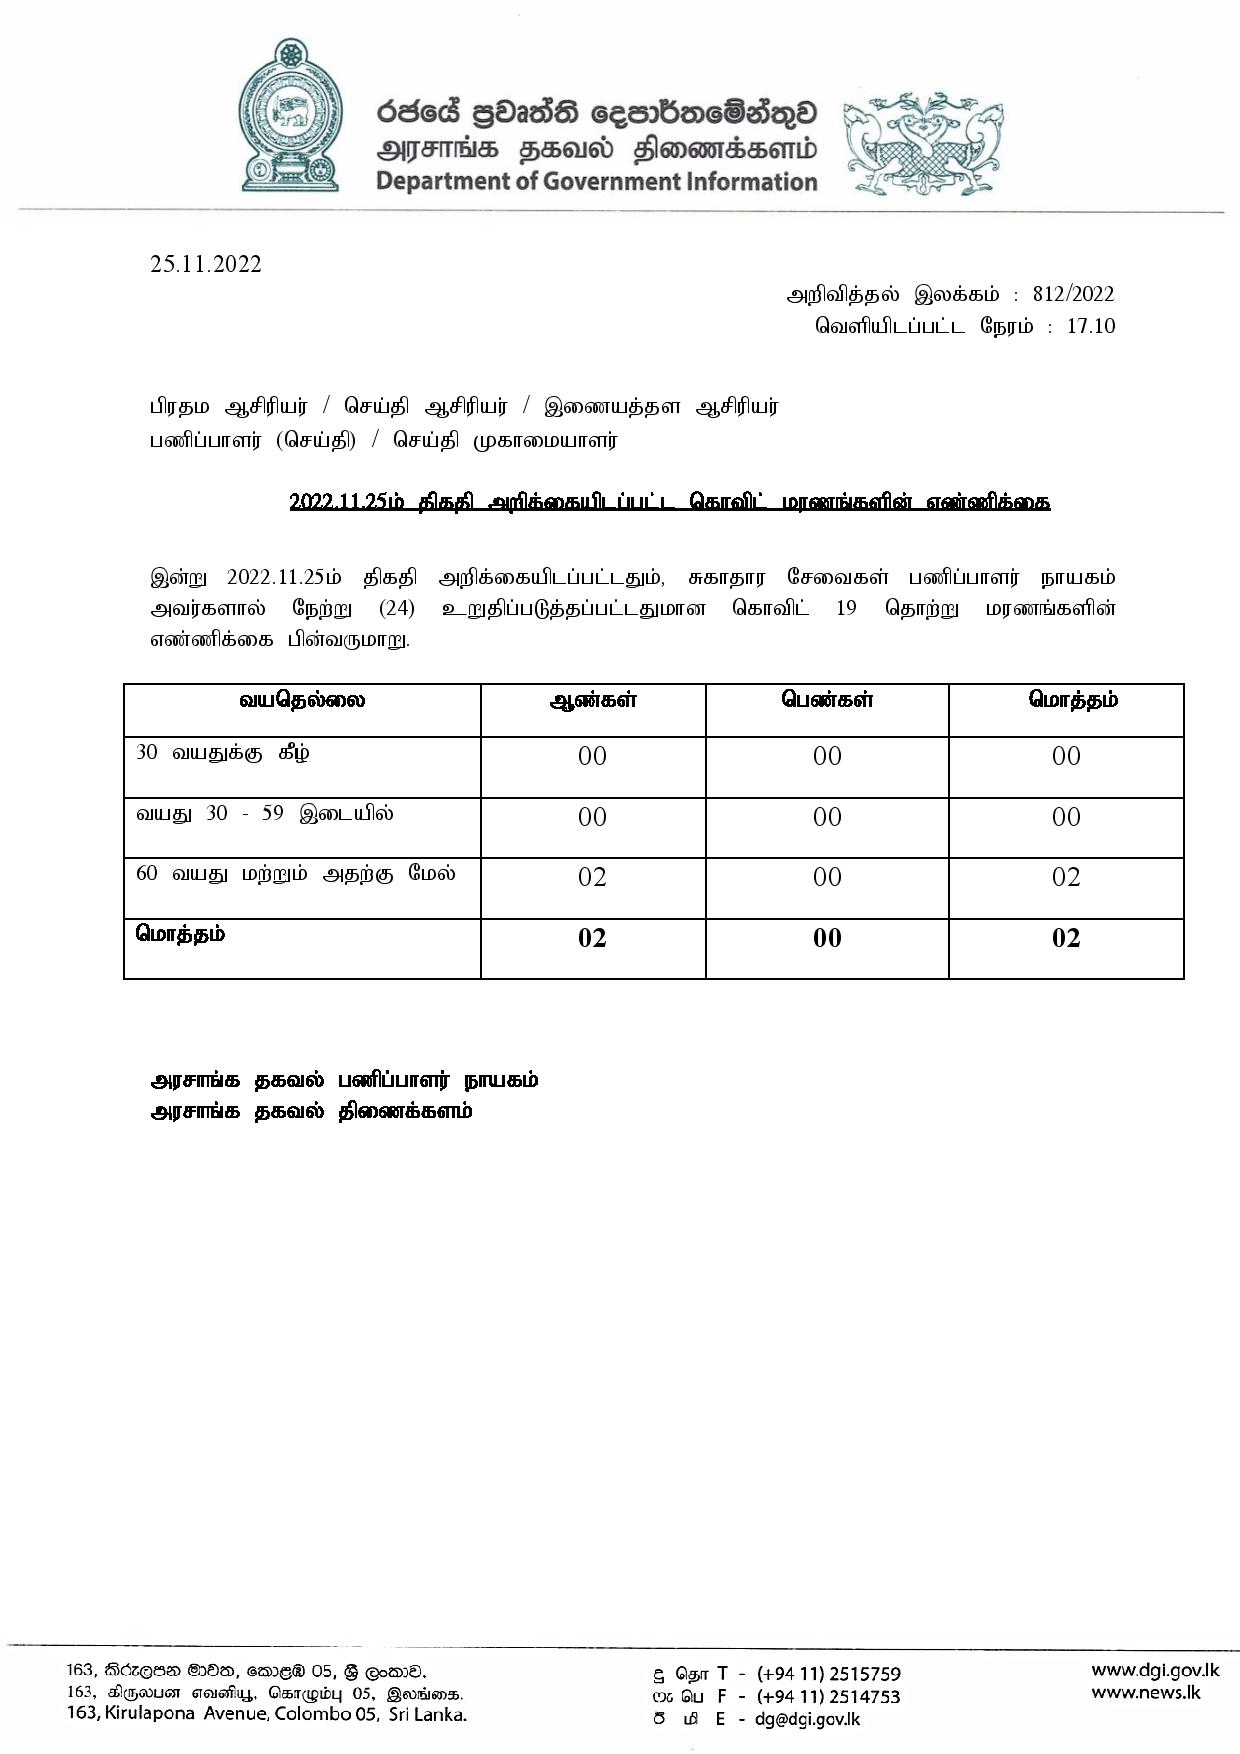 Release no 812 Tamil page 001